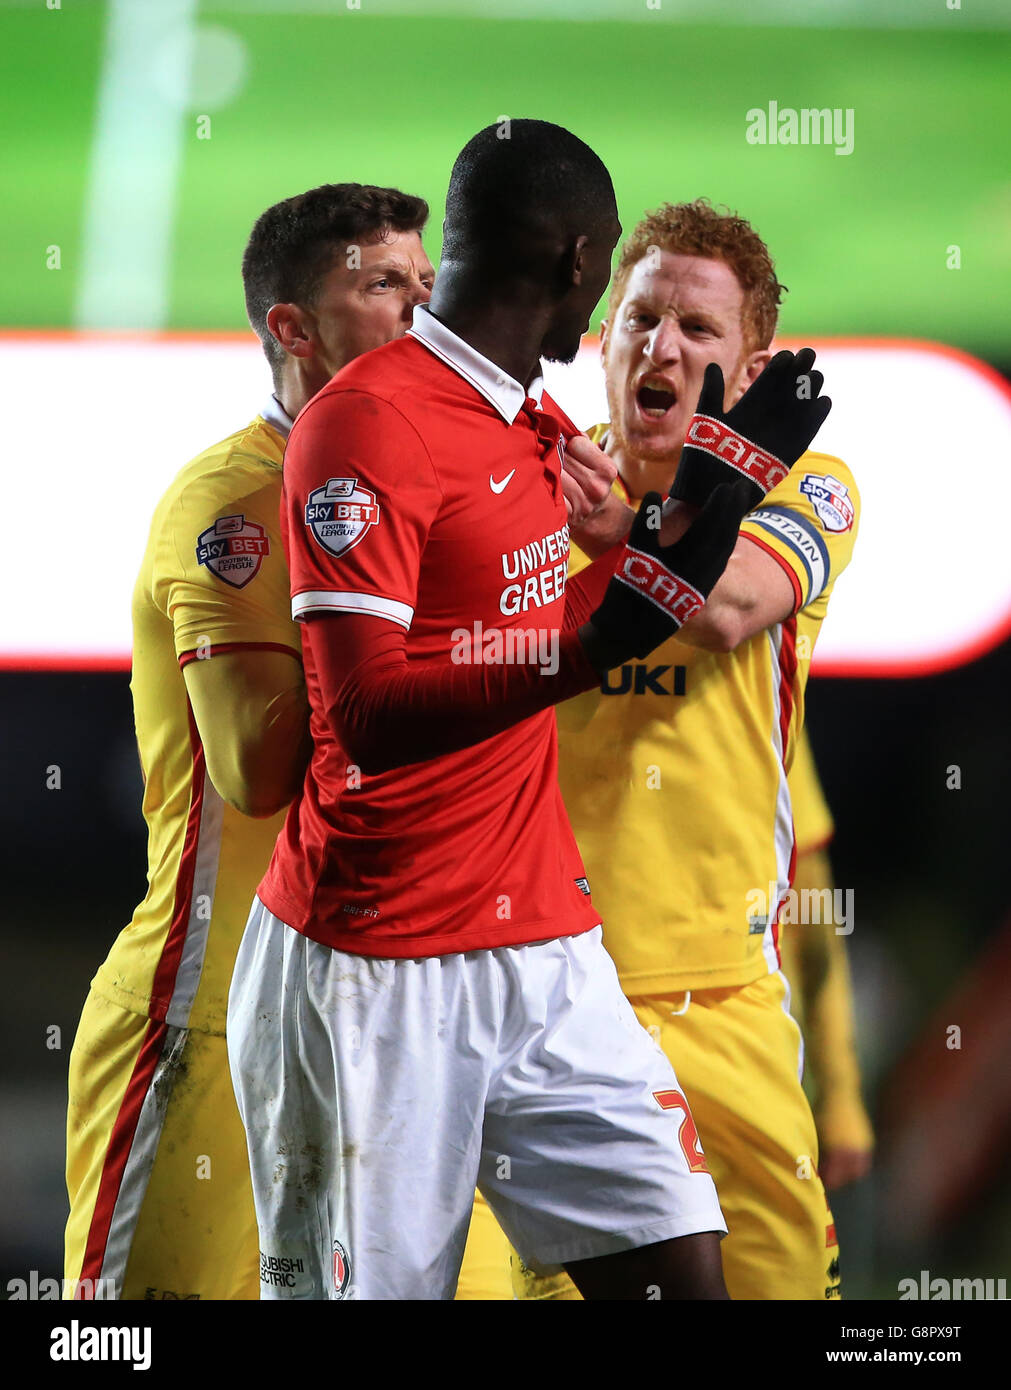 Charlton Athletic v Milton Keynes Dons - Sky Bet Championship - The Valley. Milton Keynes Dons' Dean Lewington, (right) yells at Charlton Athletic's Yaya Sanogo after which he was sent off Stock Photo